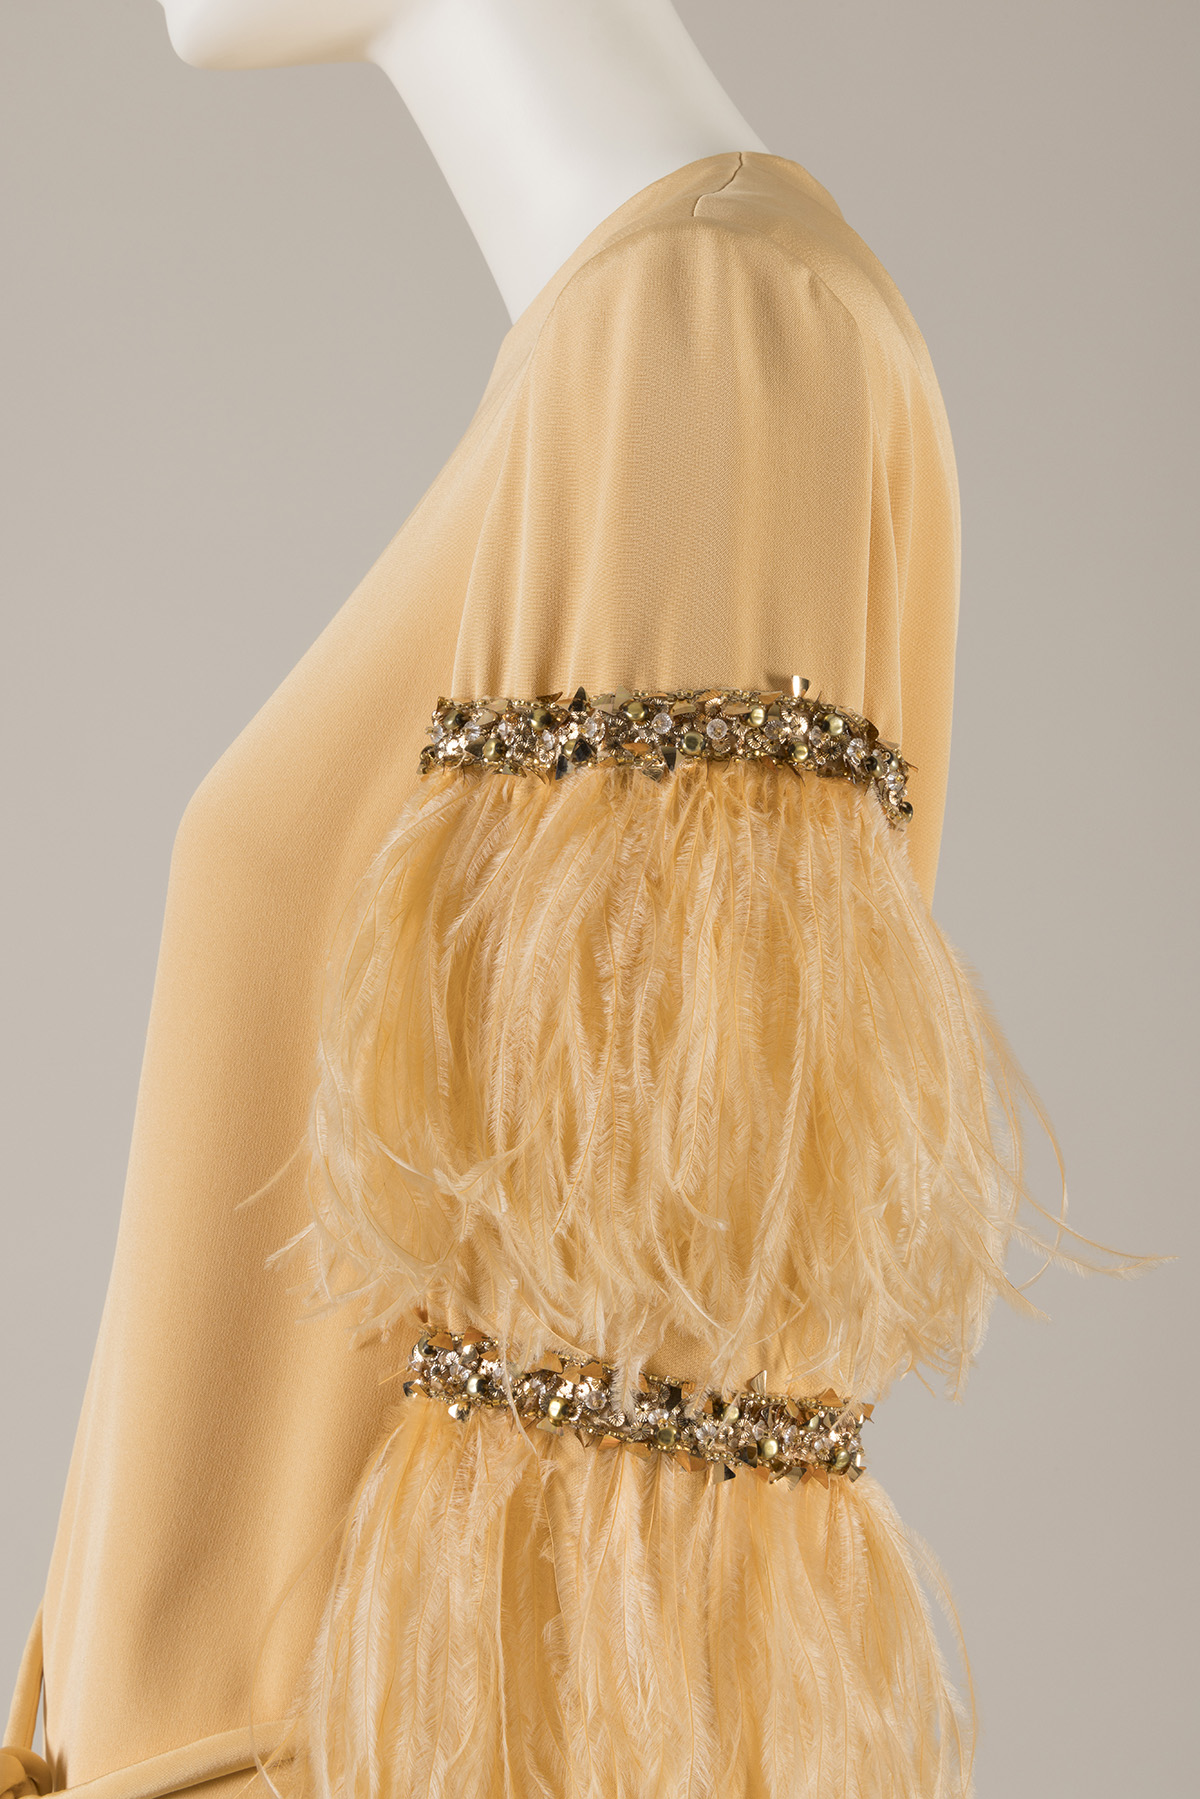 Partial side view of a silk dress sleeve trimmed with feathers and horizontal bands of rhinestones and beads at mid-arm.  